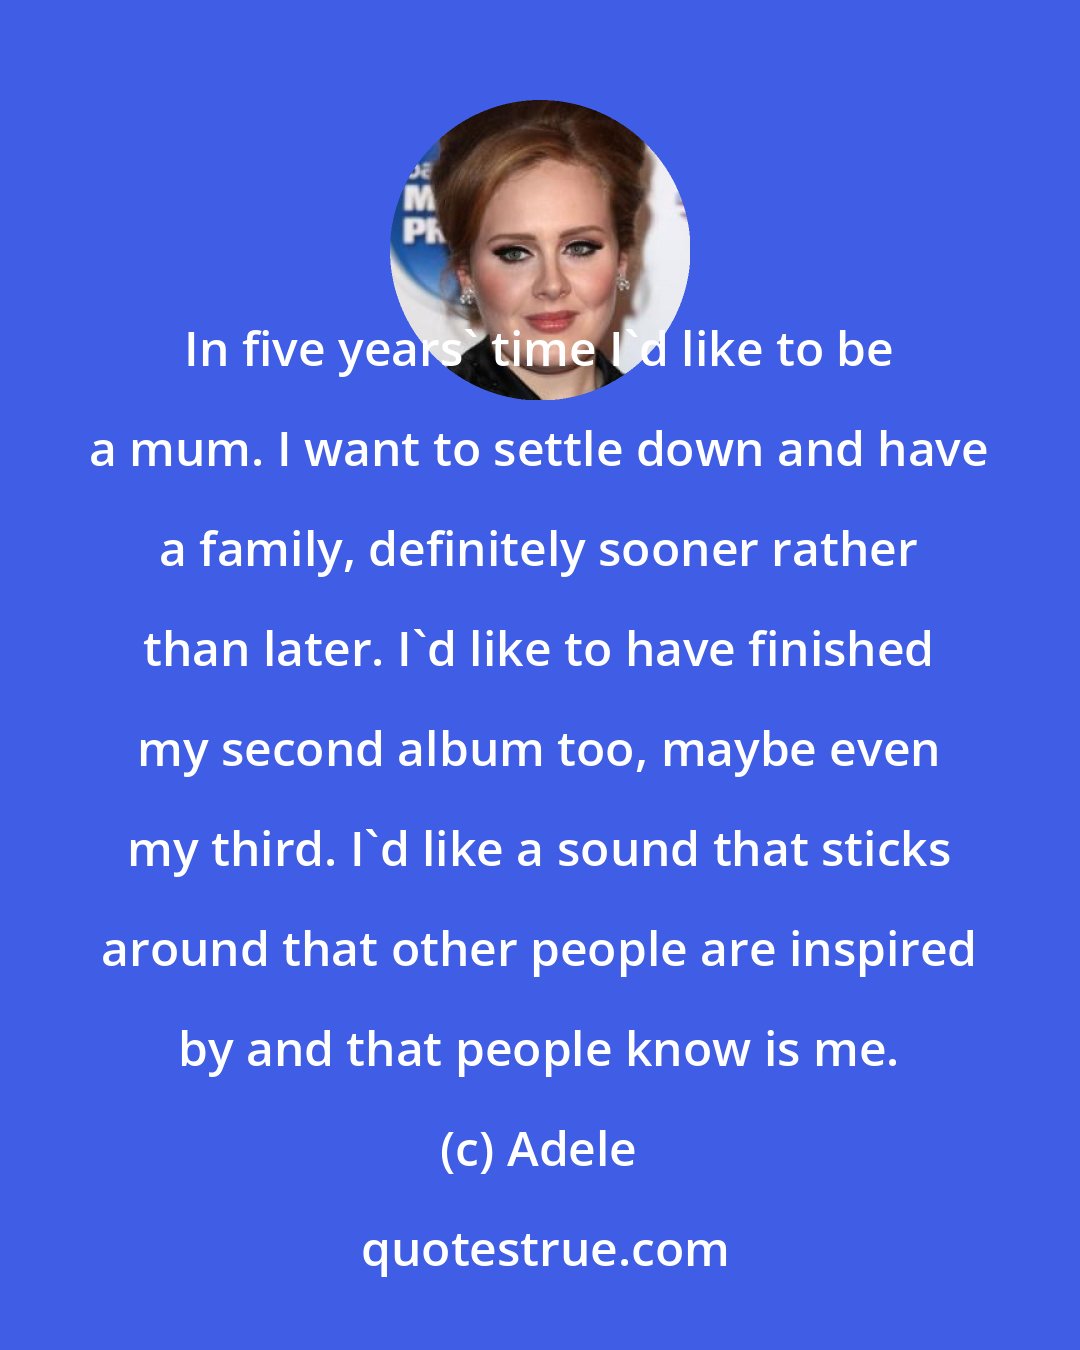 Adele: In five years' time I'd like to be a mum. I want to settle down and have a family, definitely sooner rather than later. I'd like to have finished my second album too, maybe even my third. I'd like a sound that sticks around that other people are inspired by and that people know is me.